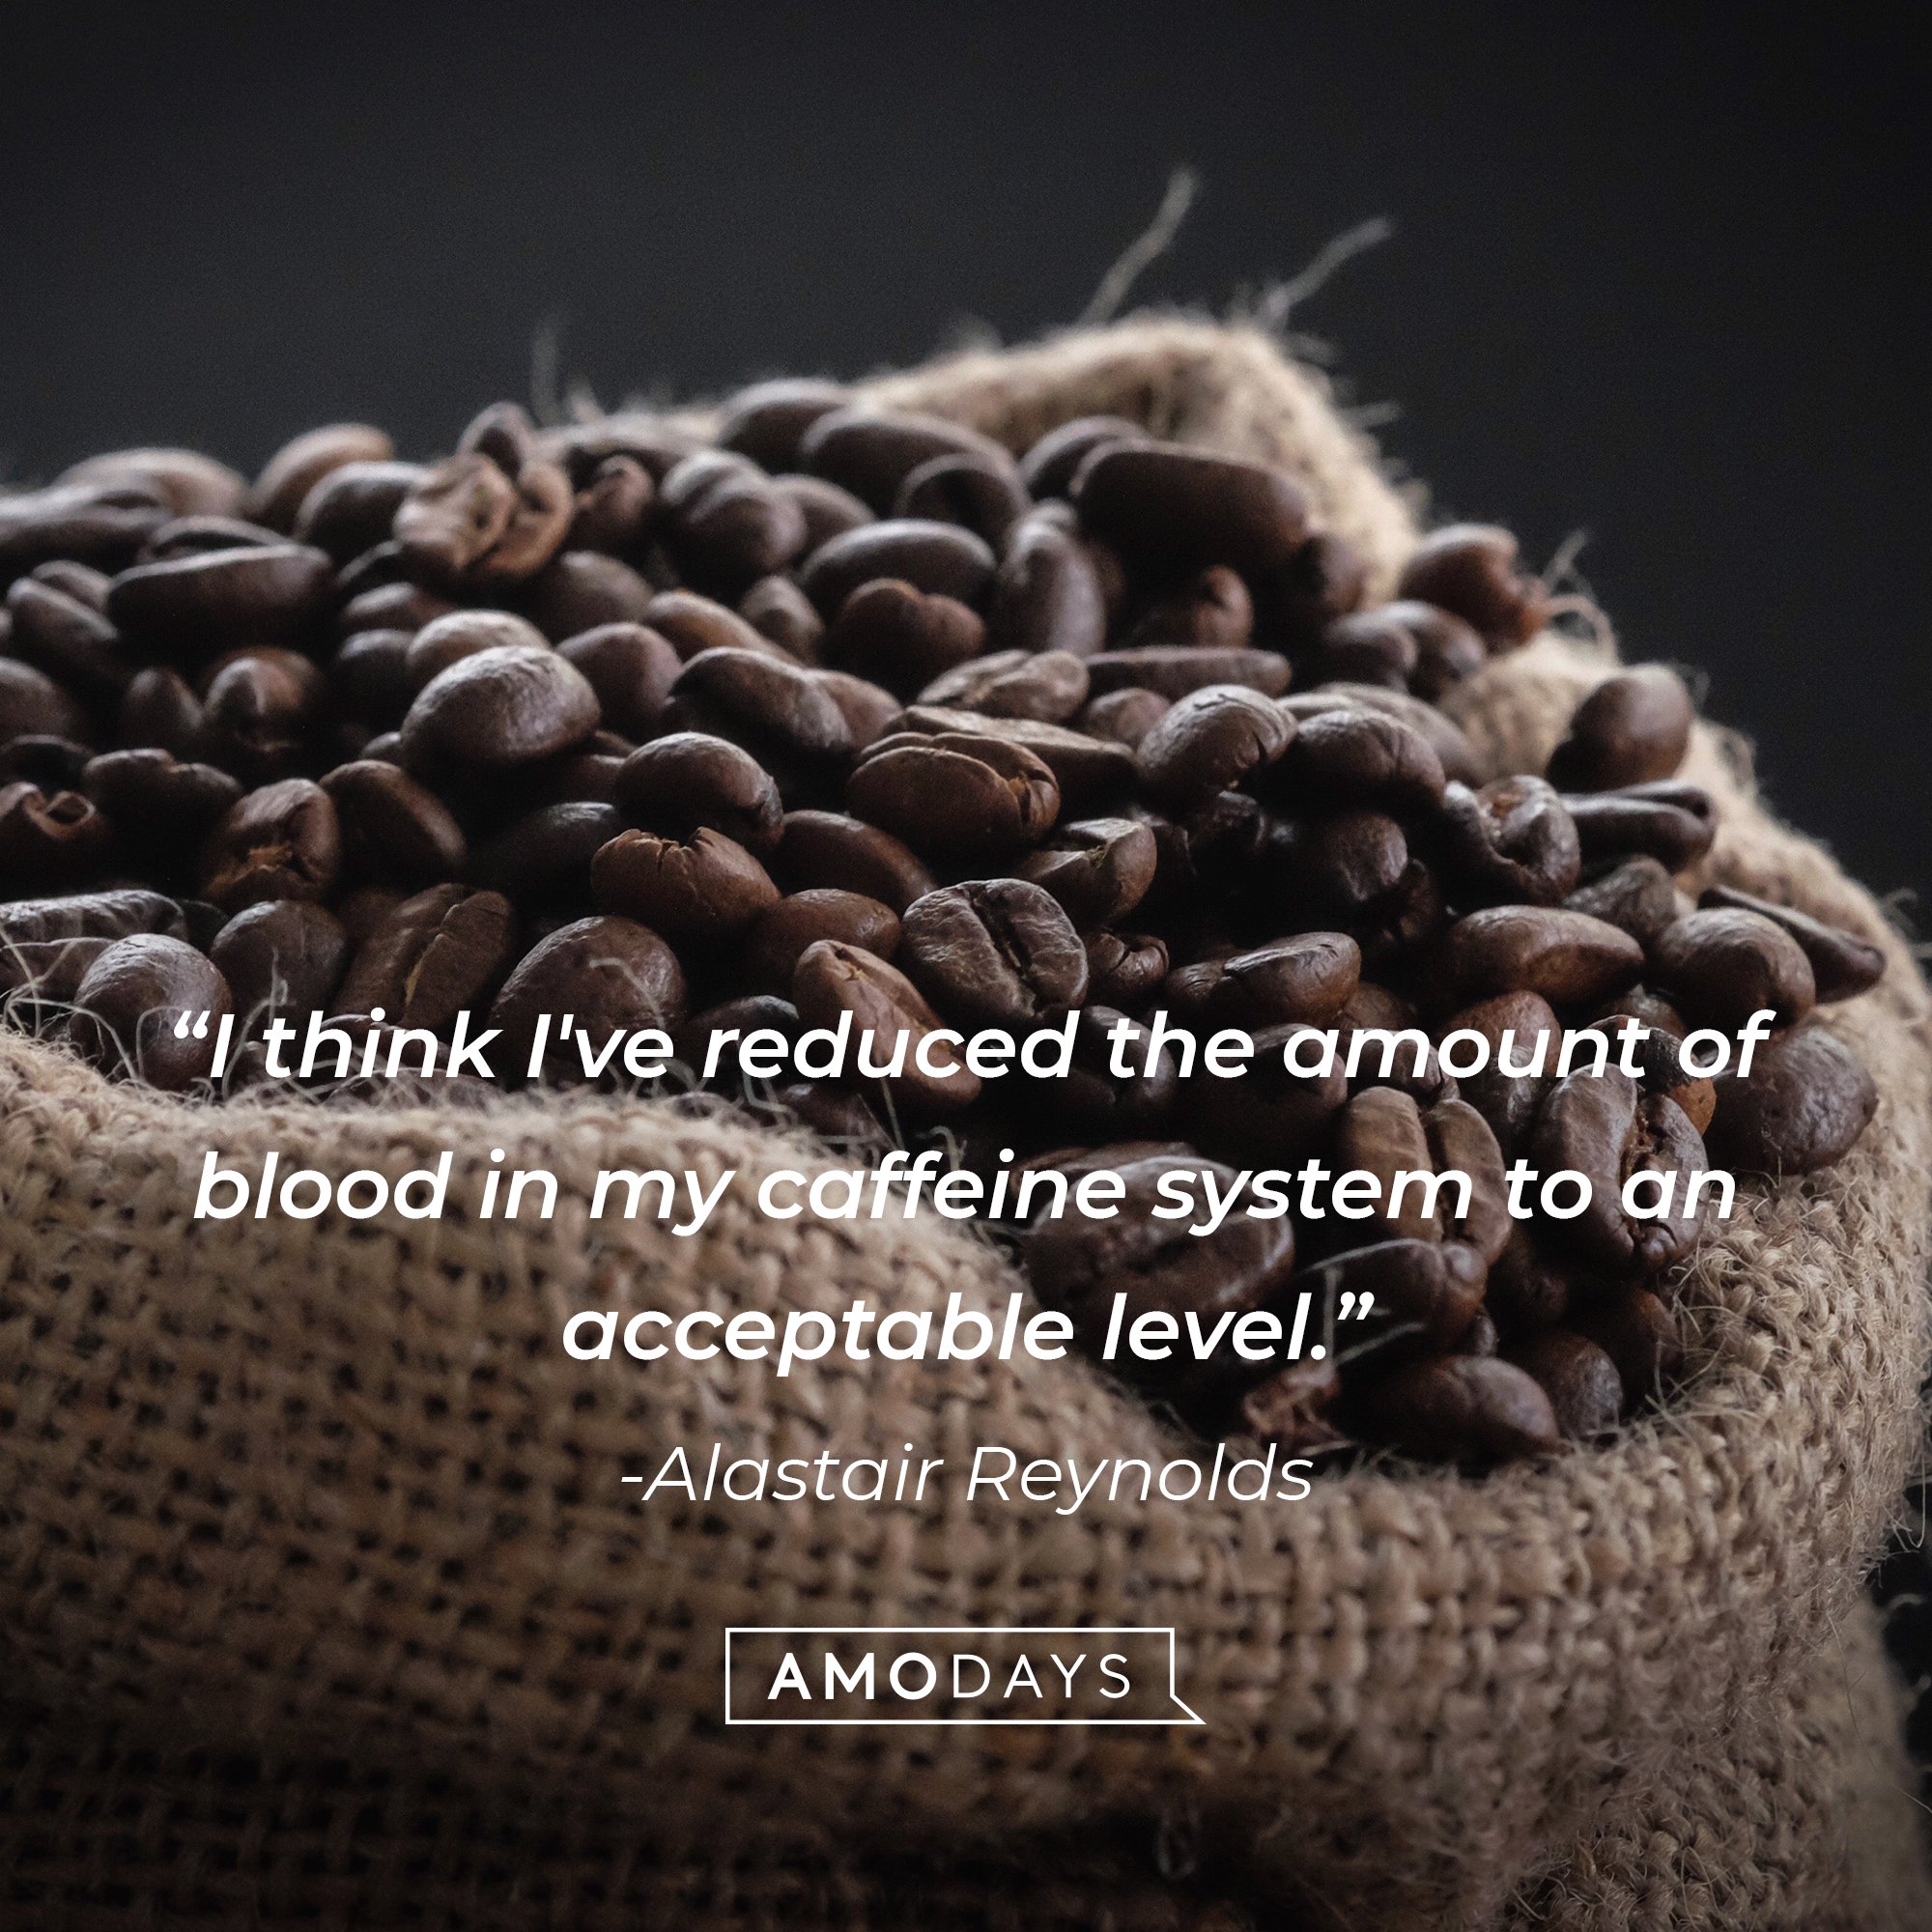 Alastair Reynolds' quote: "I think I've reduced the amount of blood in my caffeine system to an acceptable level." | Image: AmoDays